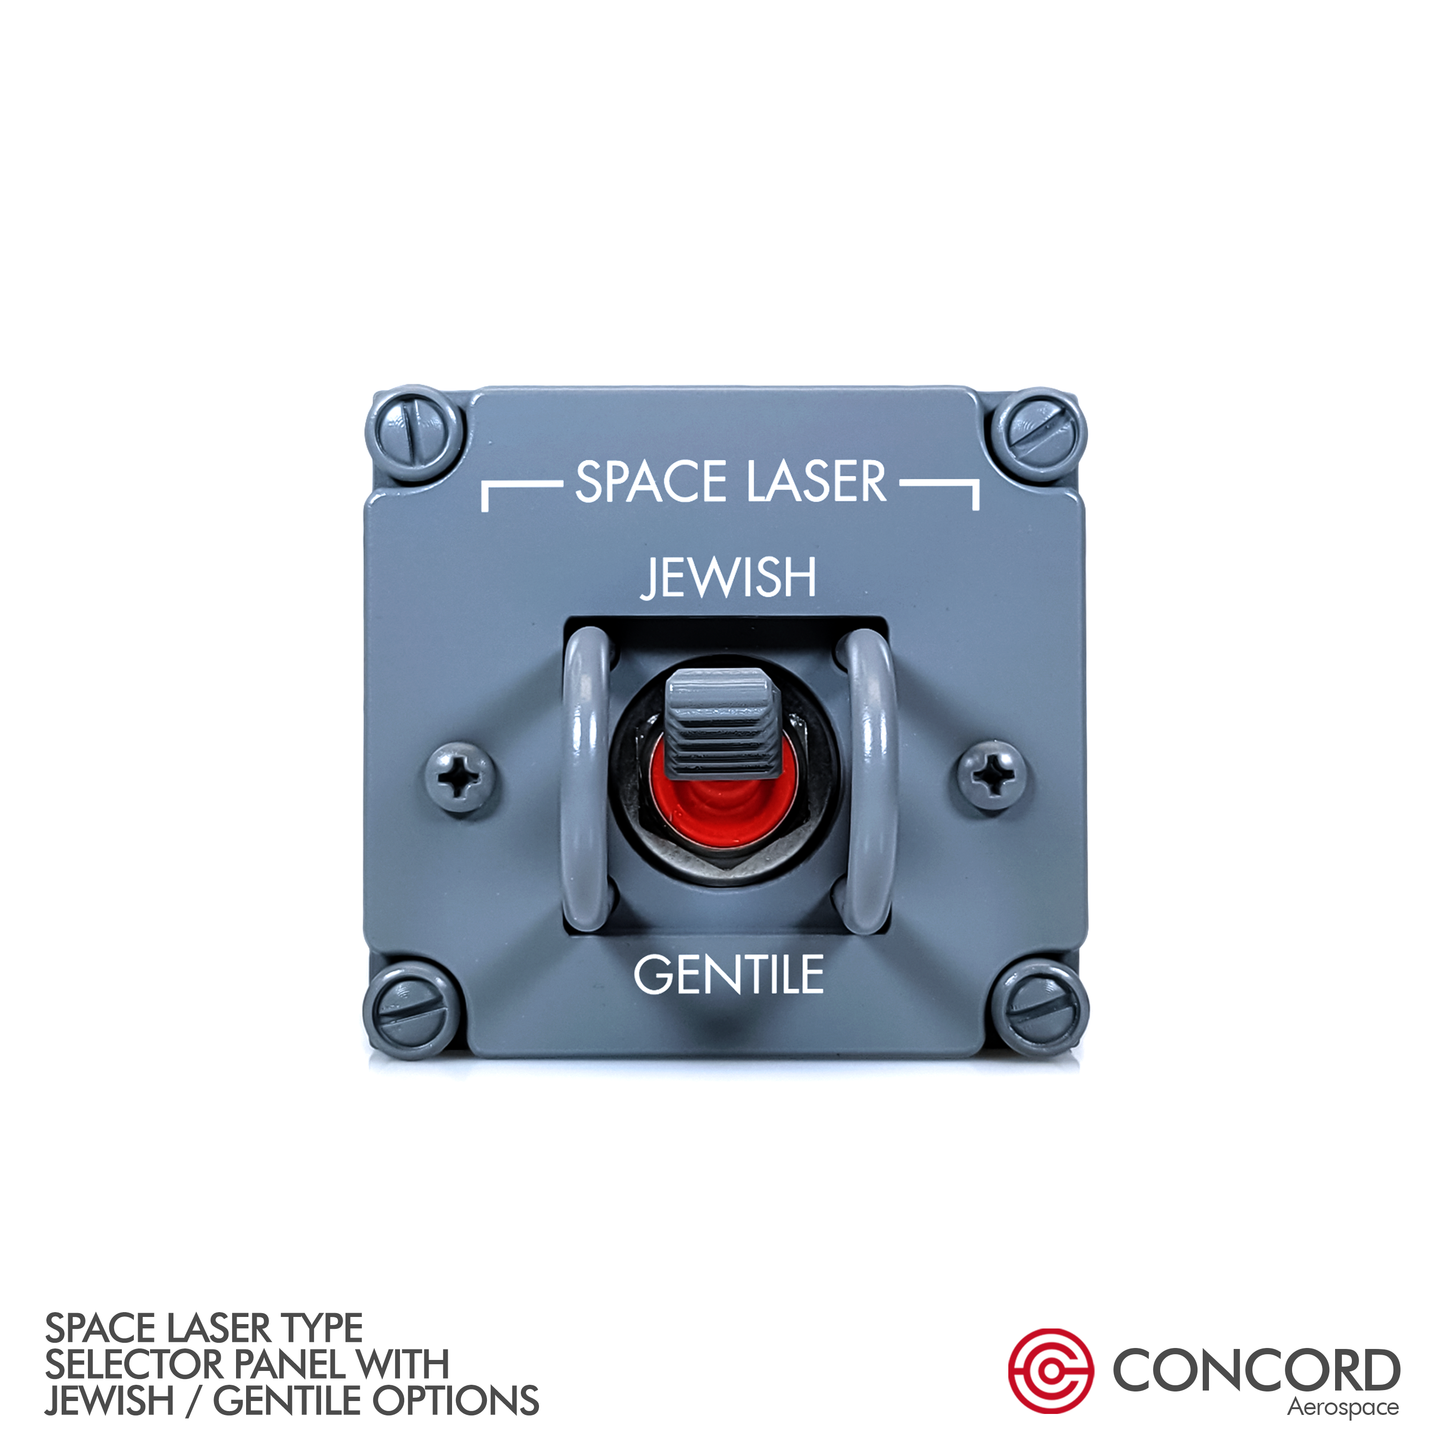 JEWISH SPACE LASER ACTIVATION PANELS - Concord Aerospace Concord Aerospace Concord Aerospace SPACE SWITCH - SINGLE